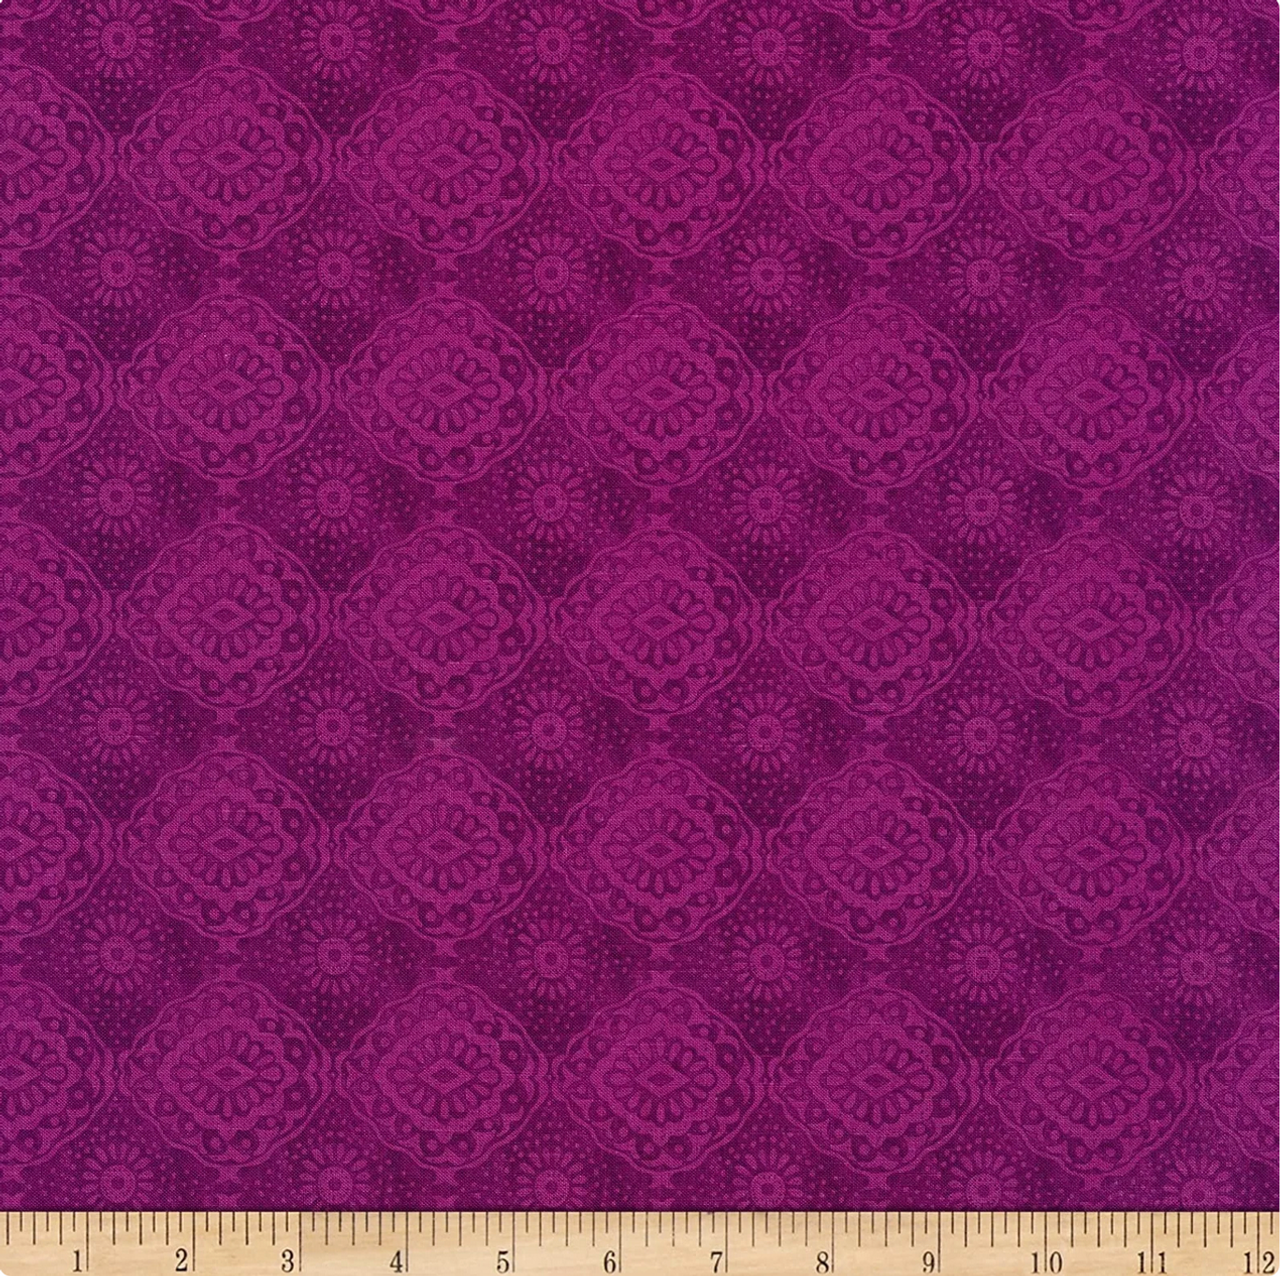 Blank Quilting Pansy Prose Tonal Tile Raspberry Cotton Fabric By The Yard